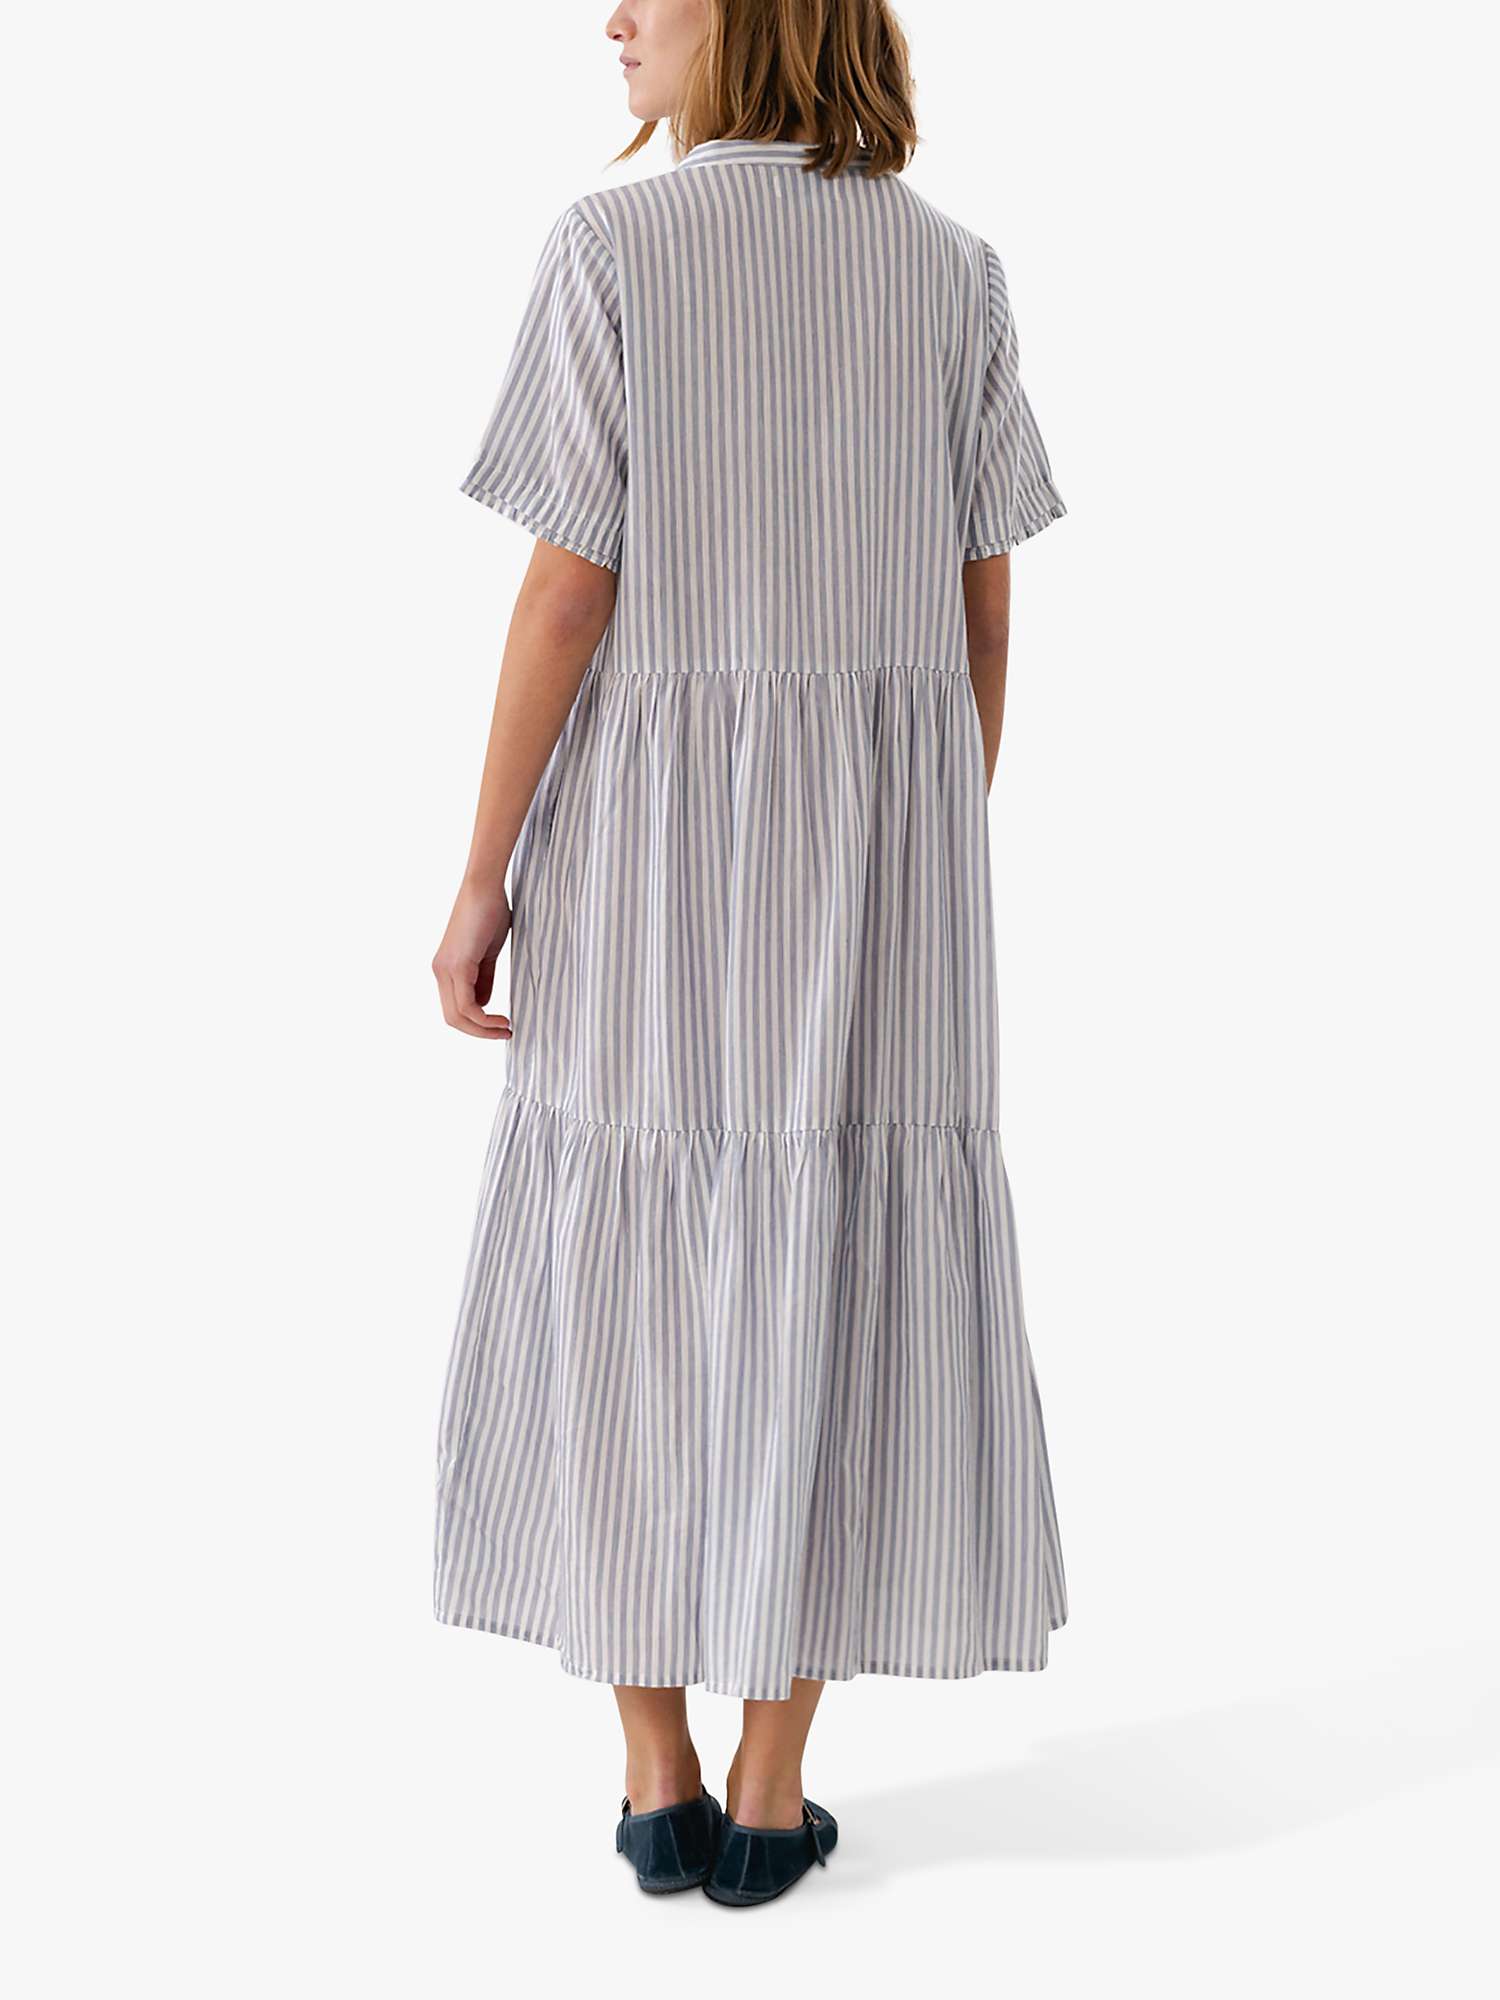 Buy Lollys Laundry Fie Striped Maxi Dress, White/Blue Online at johnlewis.com